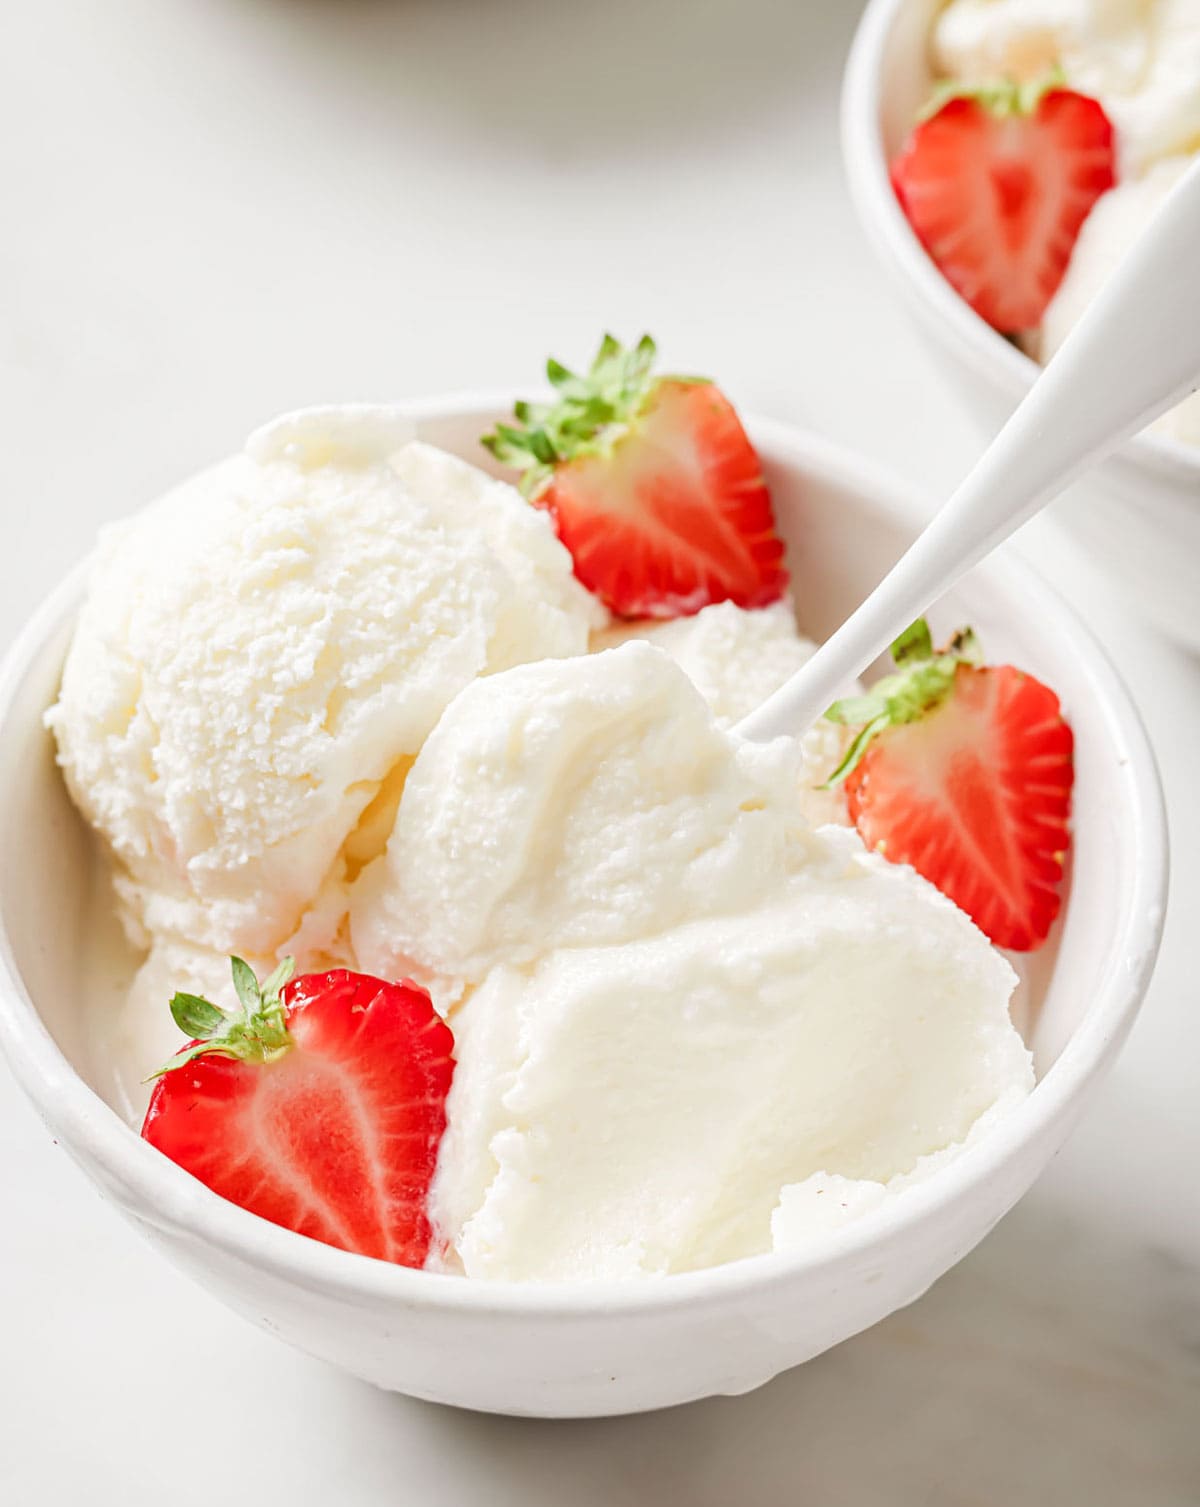 A bowl with frozen yogurt scoops, a spoon and strawberries.